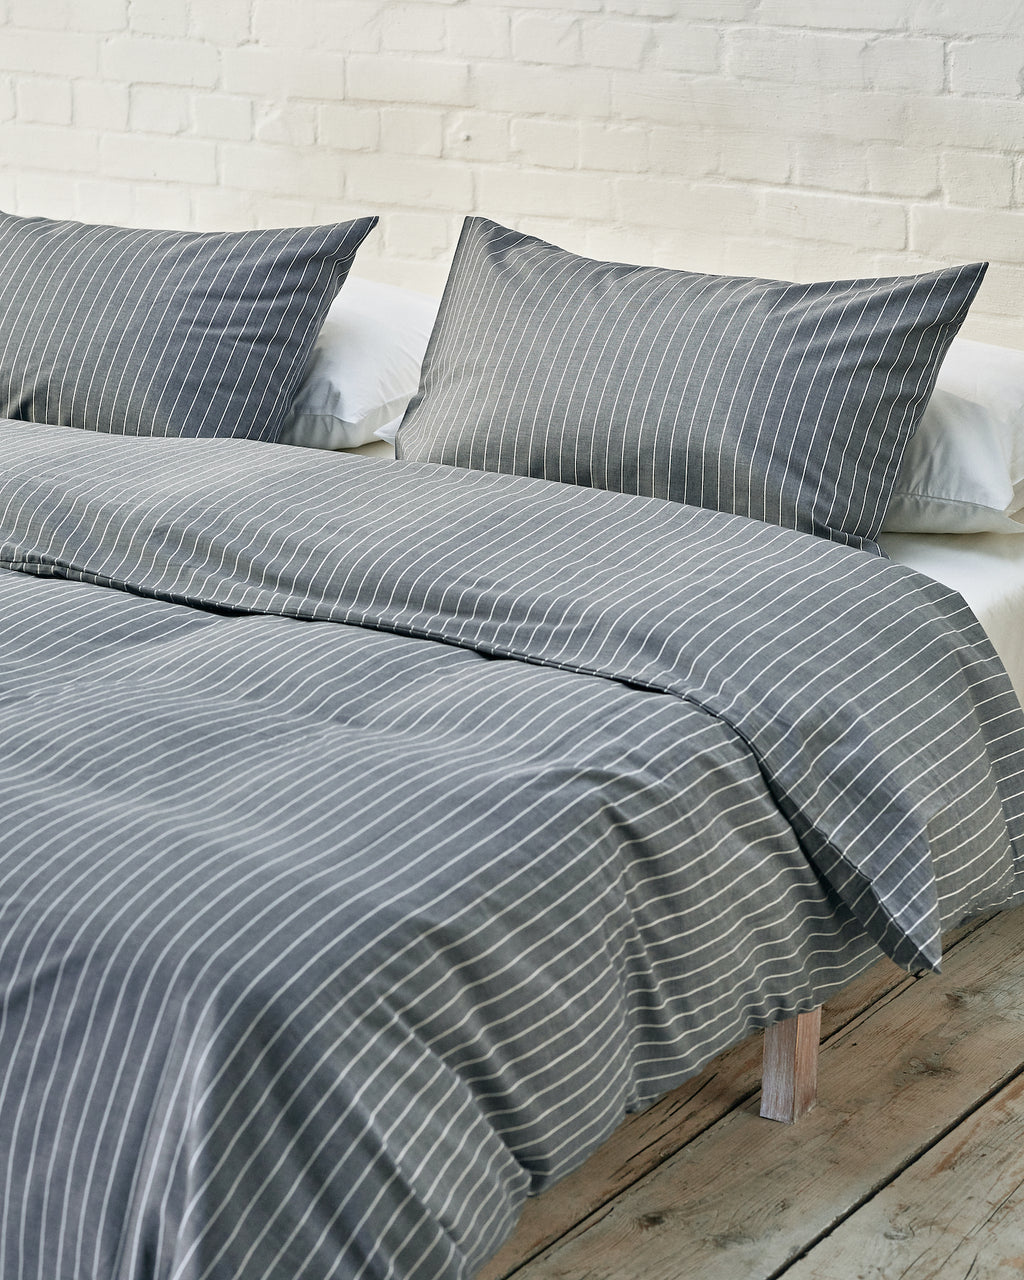 navy and white striped bedding set in an industrial bedroom